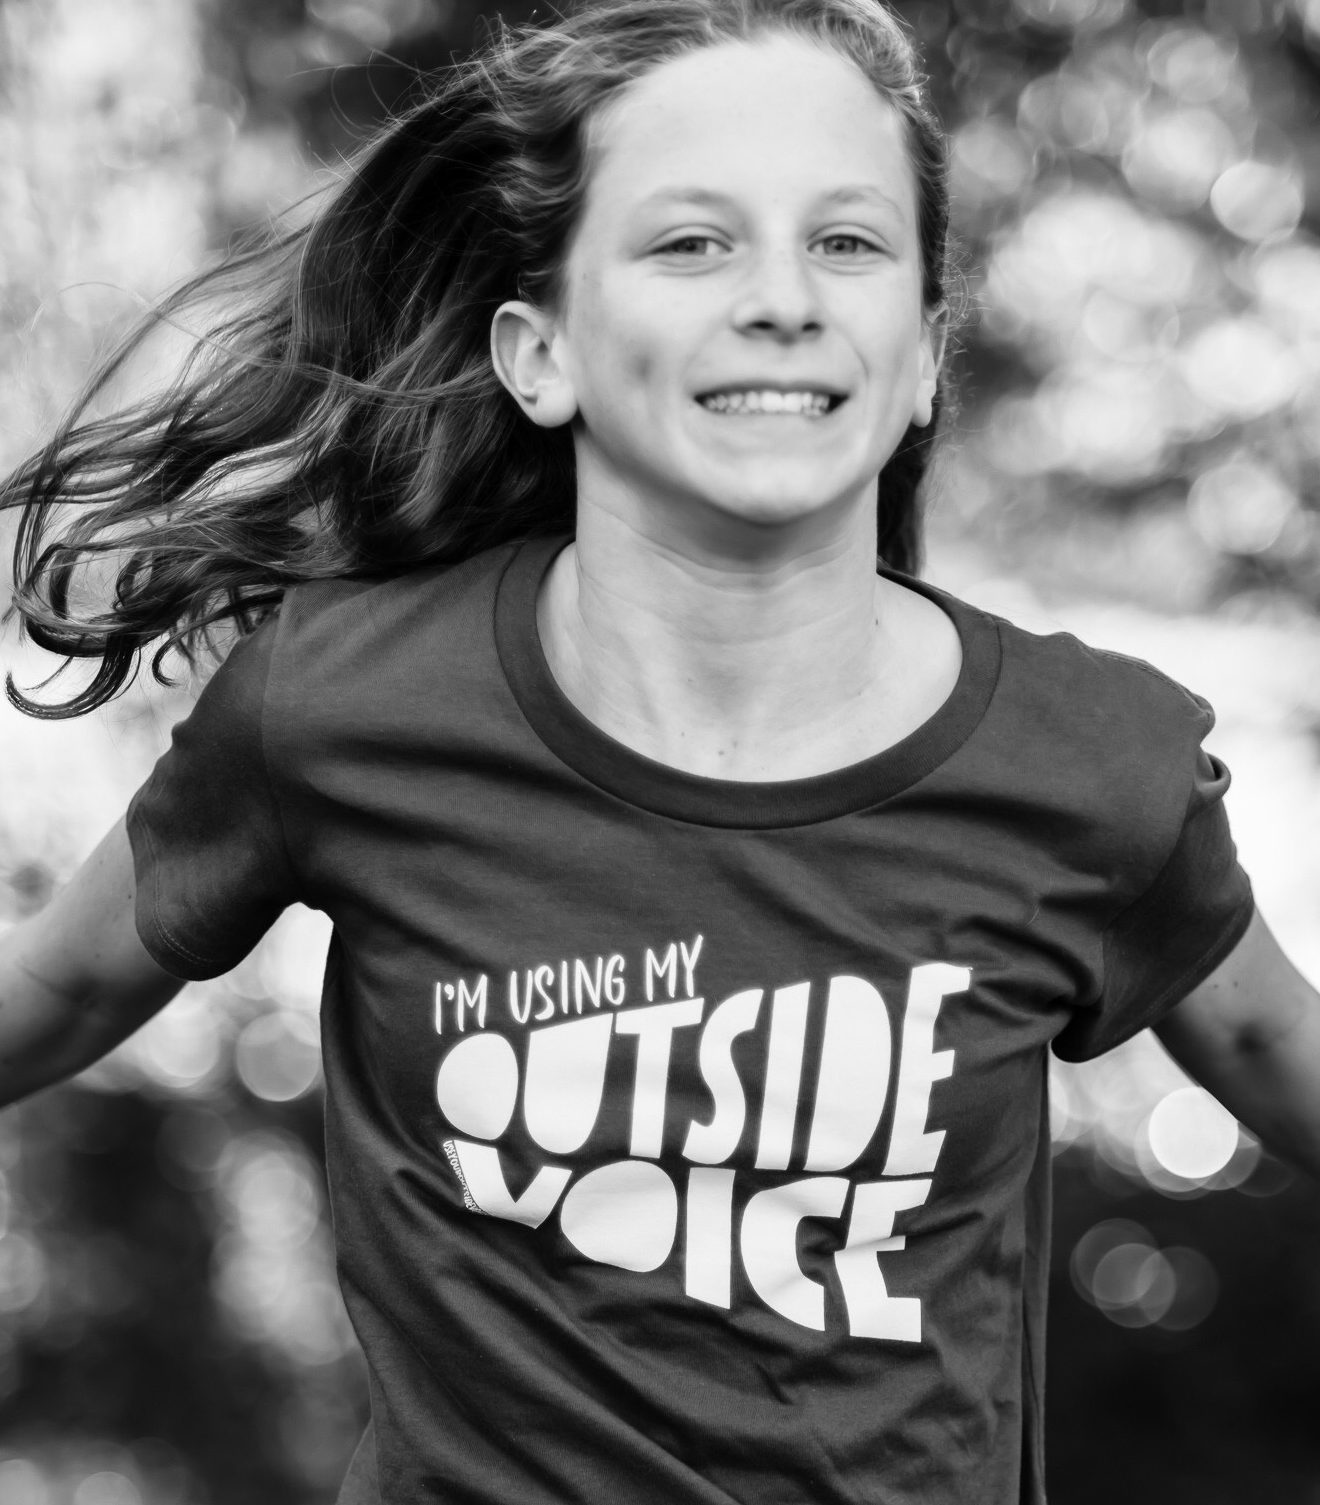 Black and white image of a blonde haired girl wearing a t-shirt with a logo that says, "I'm using my outside voice"